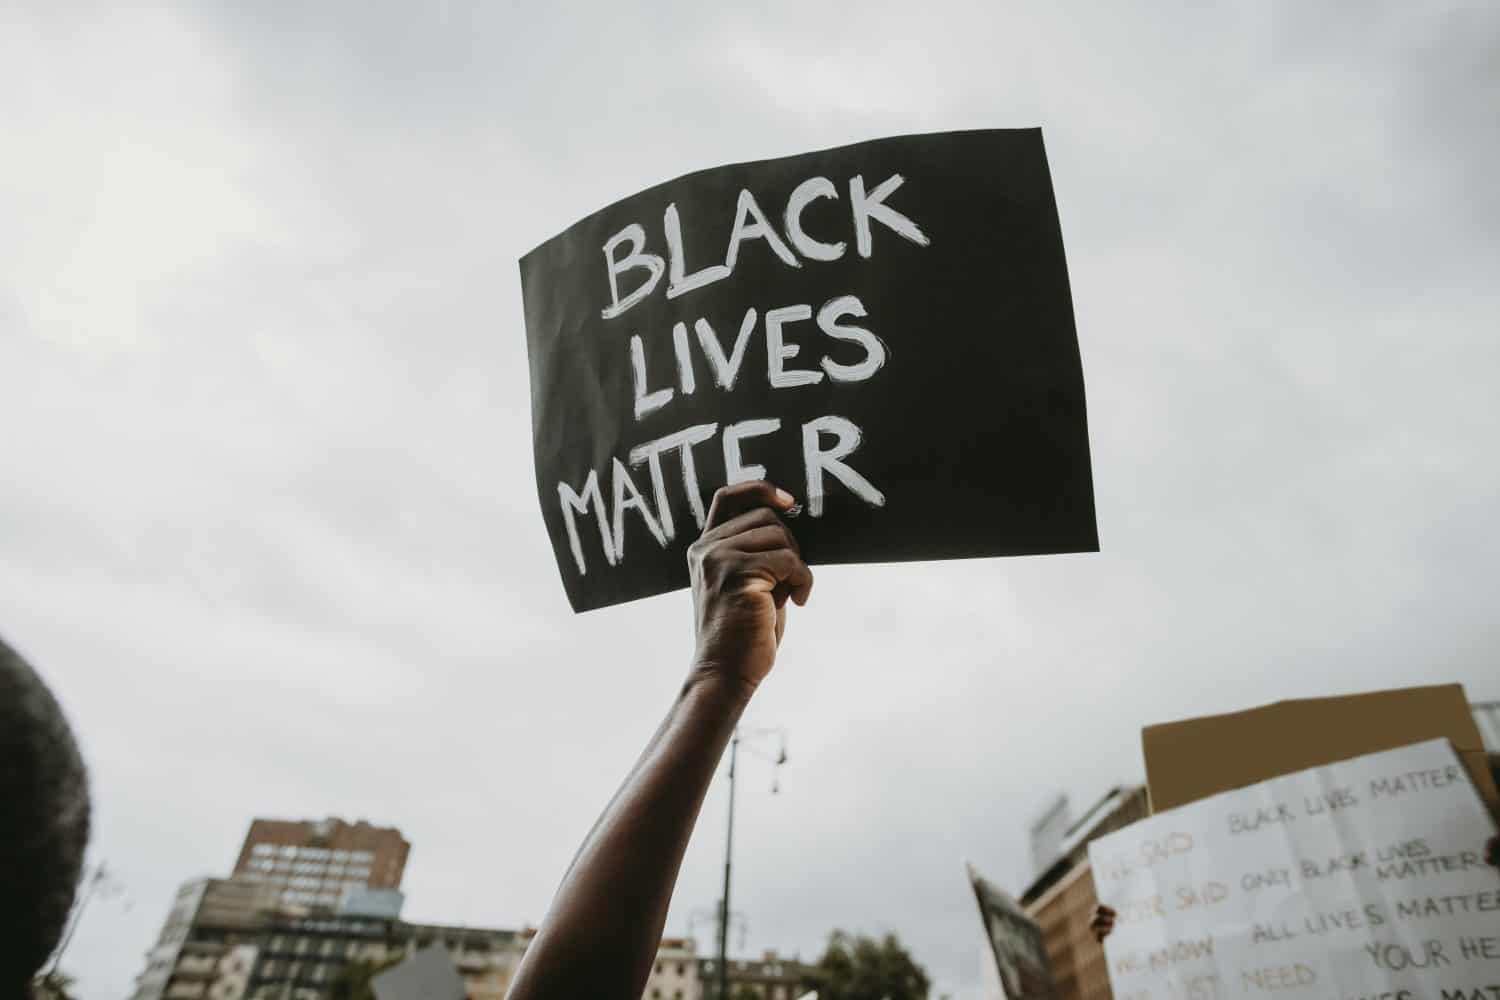 Black lives matter movement protesting in Milan, claiming for antiracism and equal human rights holding "Black lives matter" picket sign